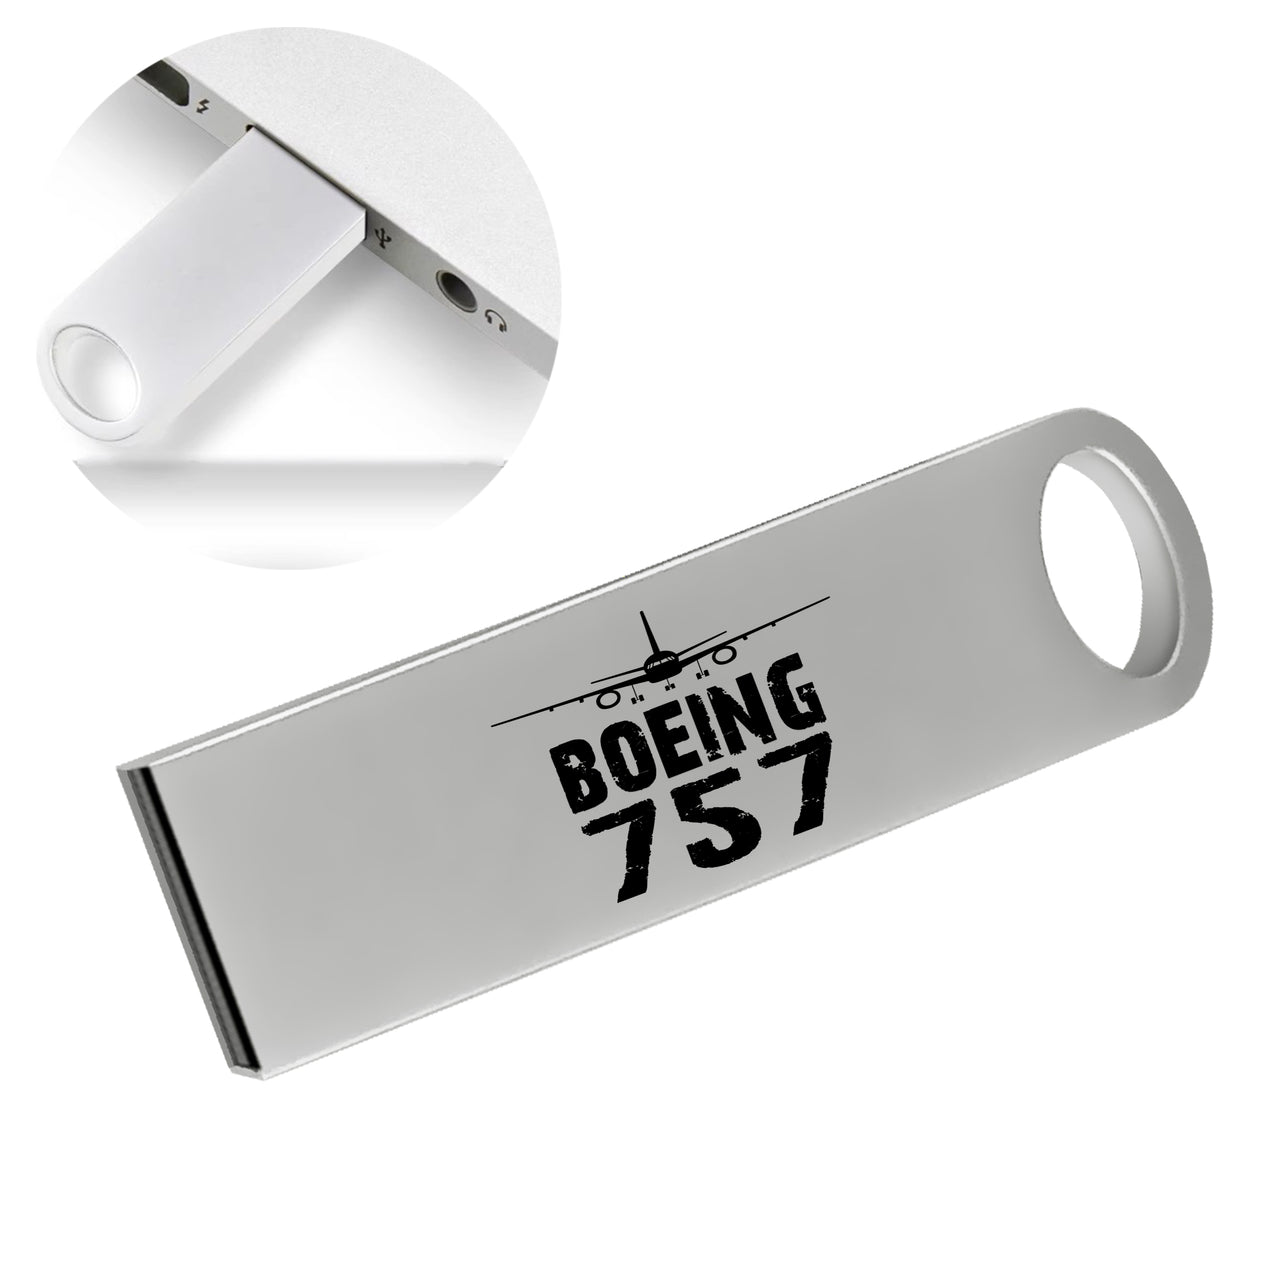 Boeing 757 & Plane Designed Waterproof USB Devices